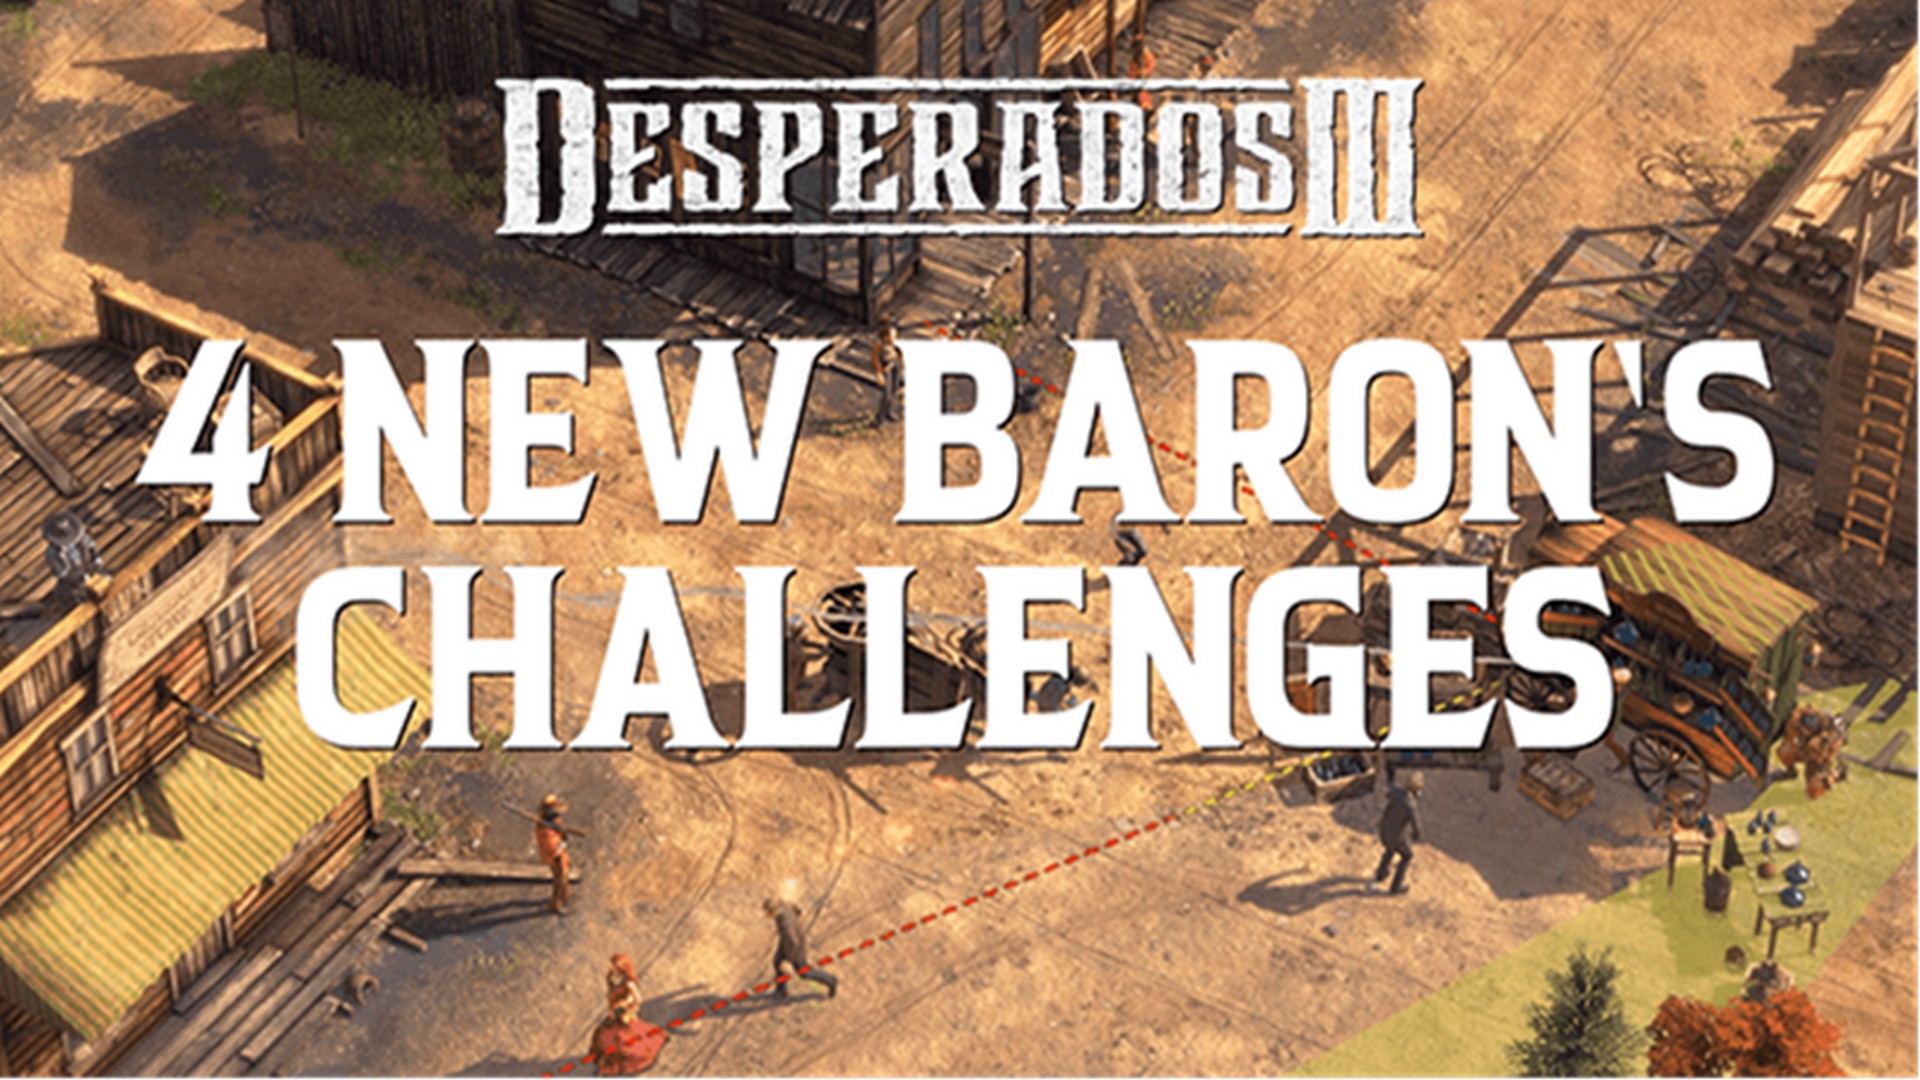 The Baron’s Call: Free Update For Desperados III With New Content – Out Now